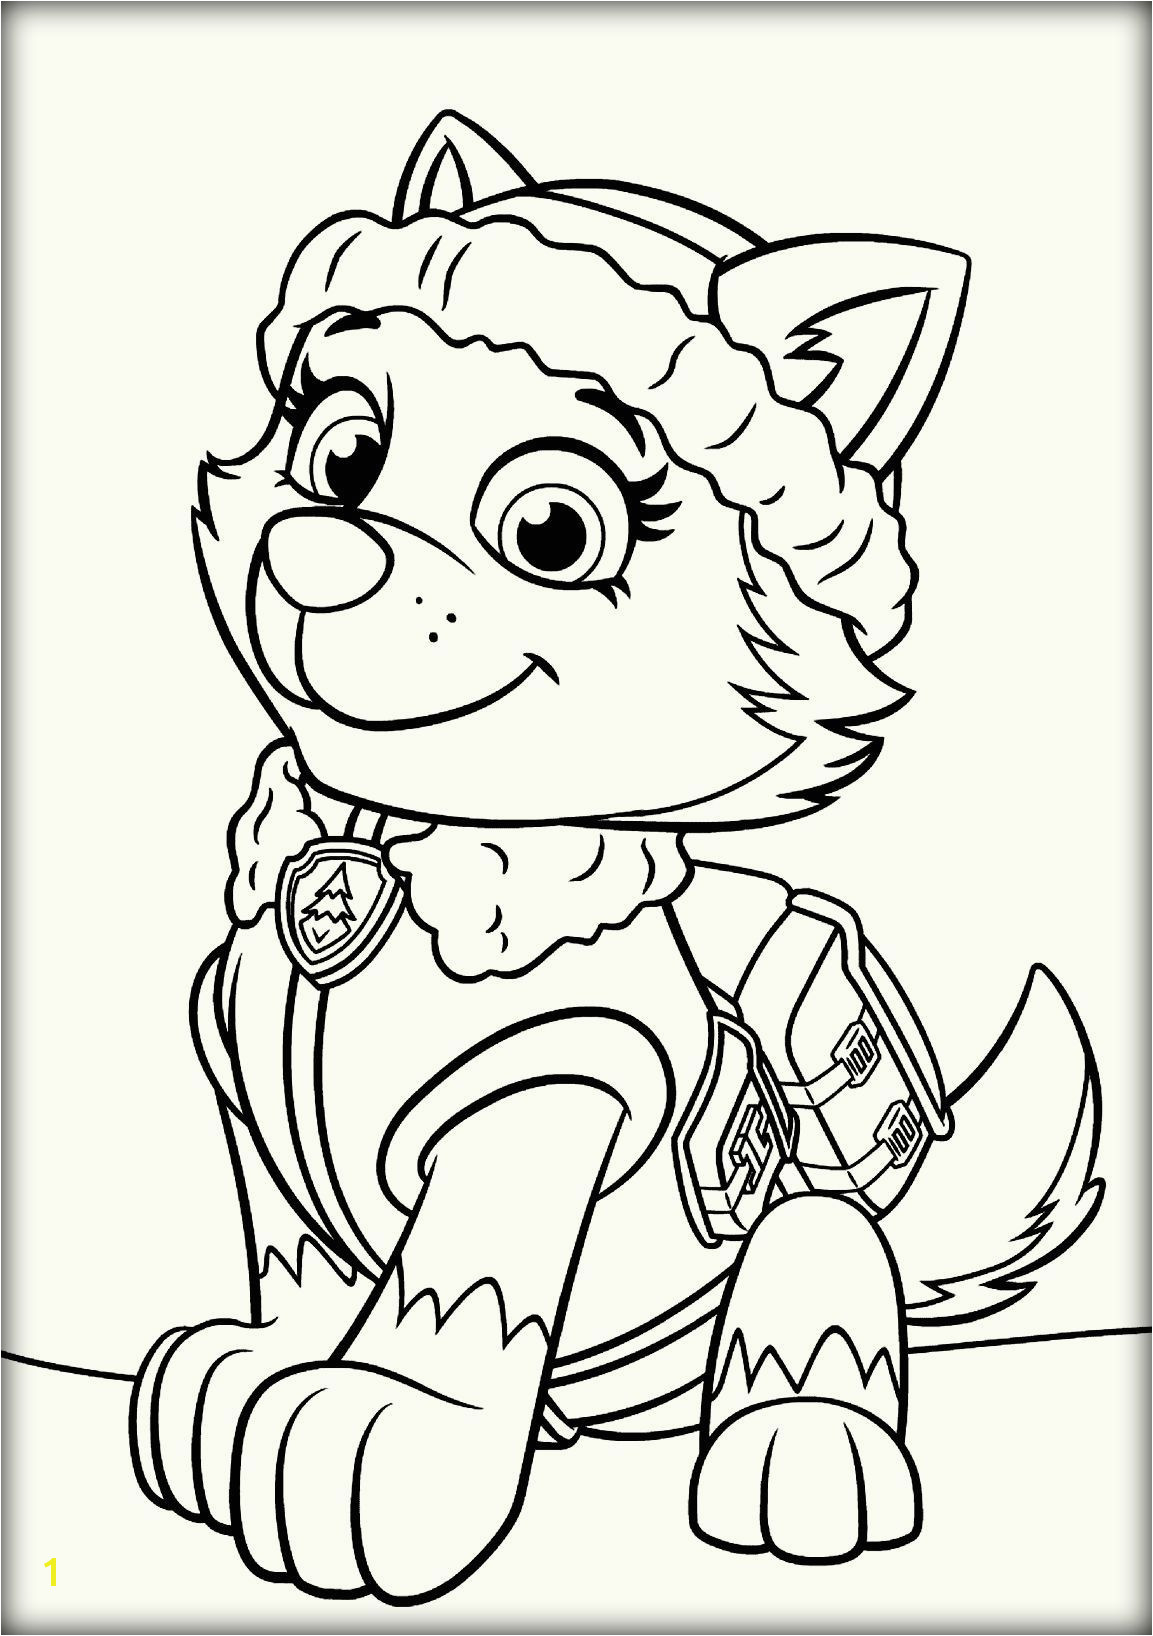 Paw patrol everest coloring pages